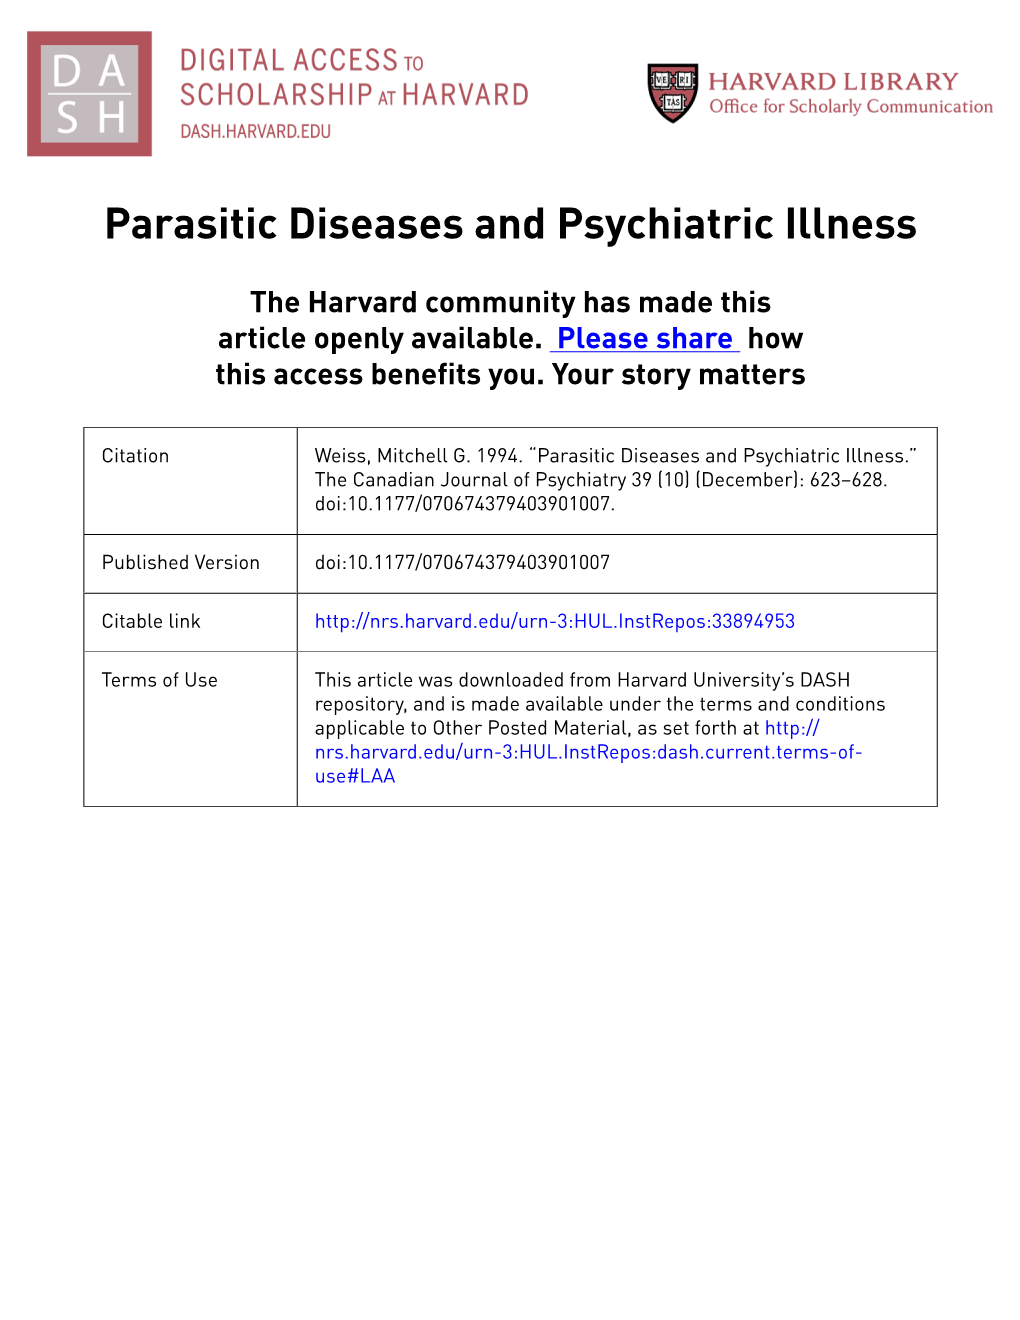 Parasitic Diseases and Psychiatric Illness